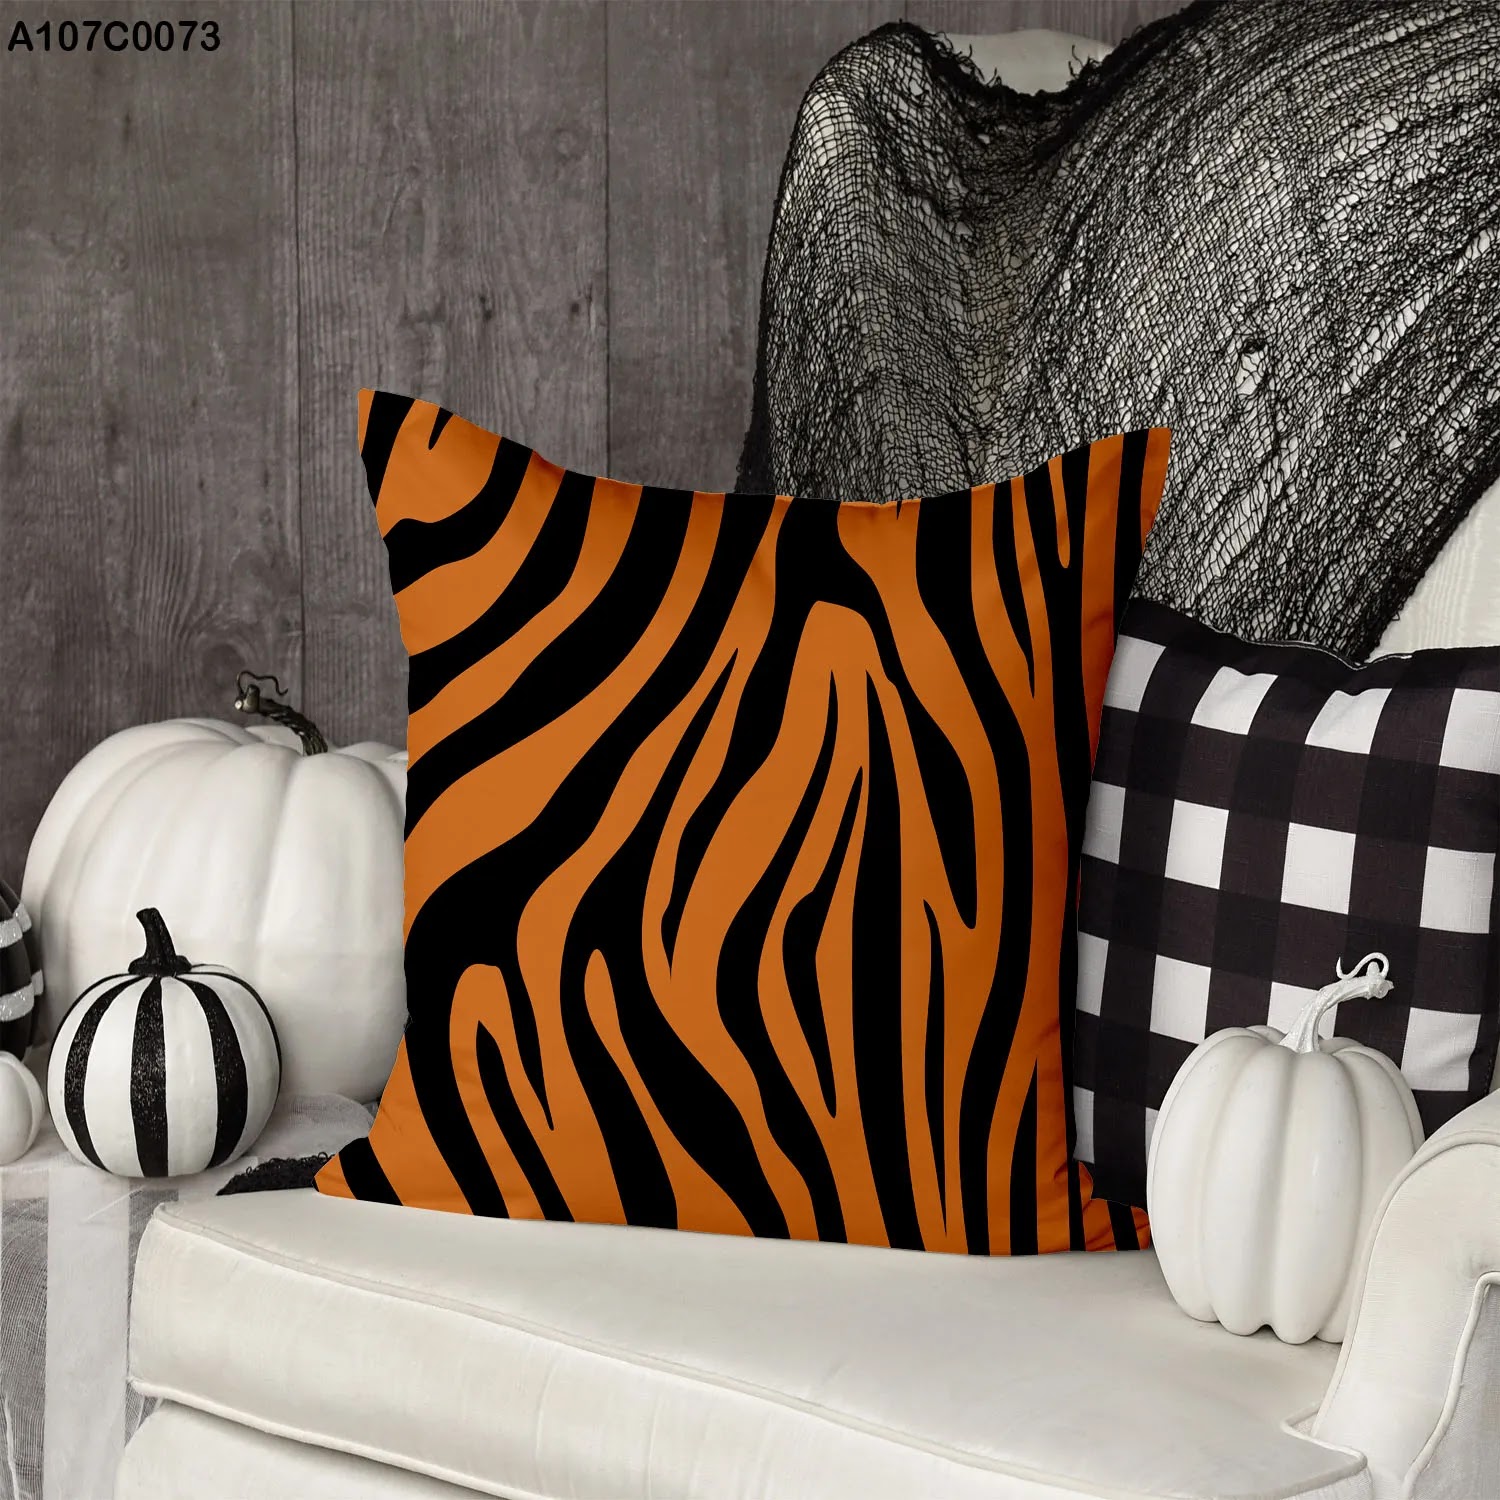 Light brown pillow case striped with black